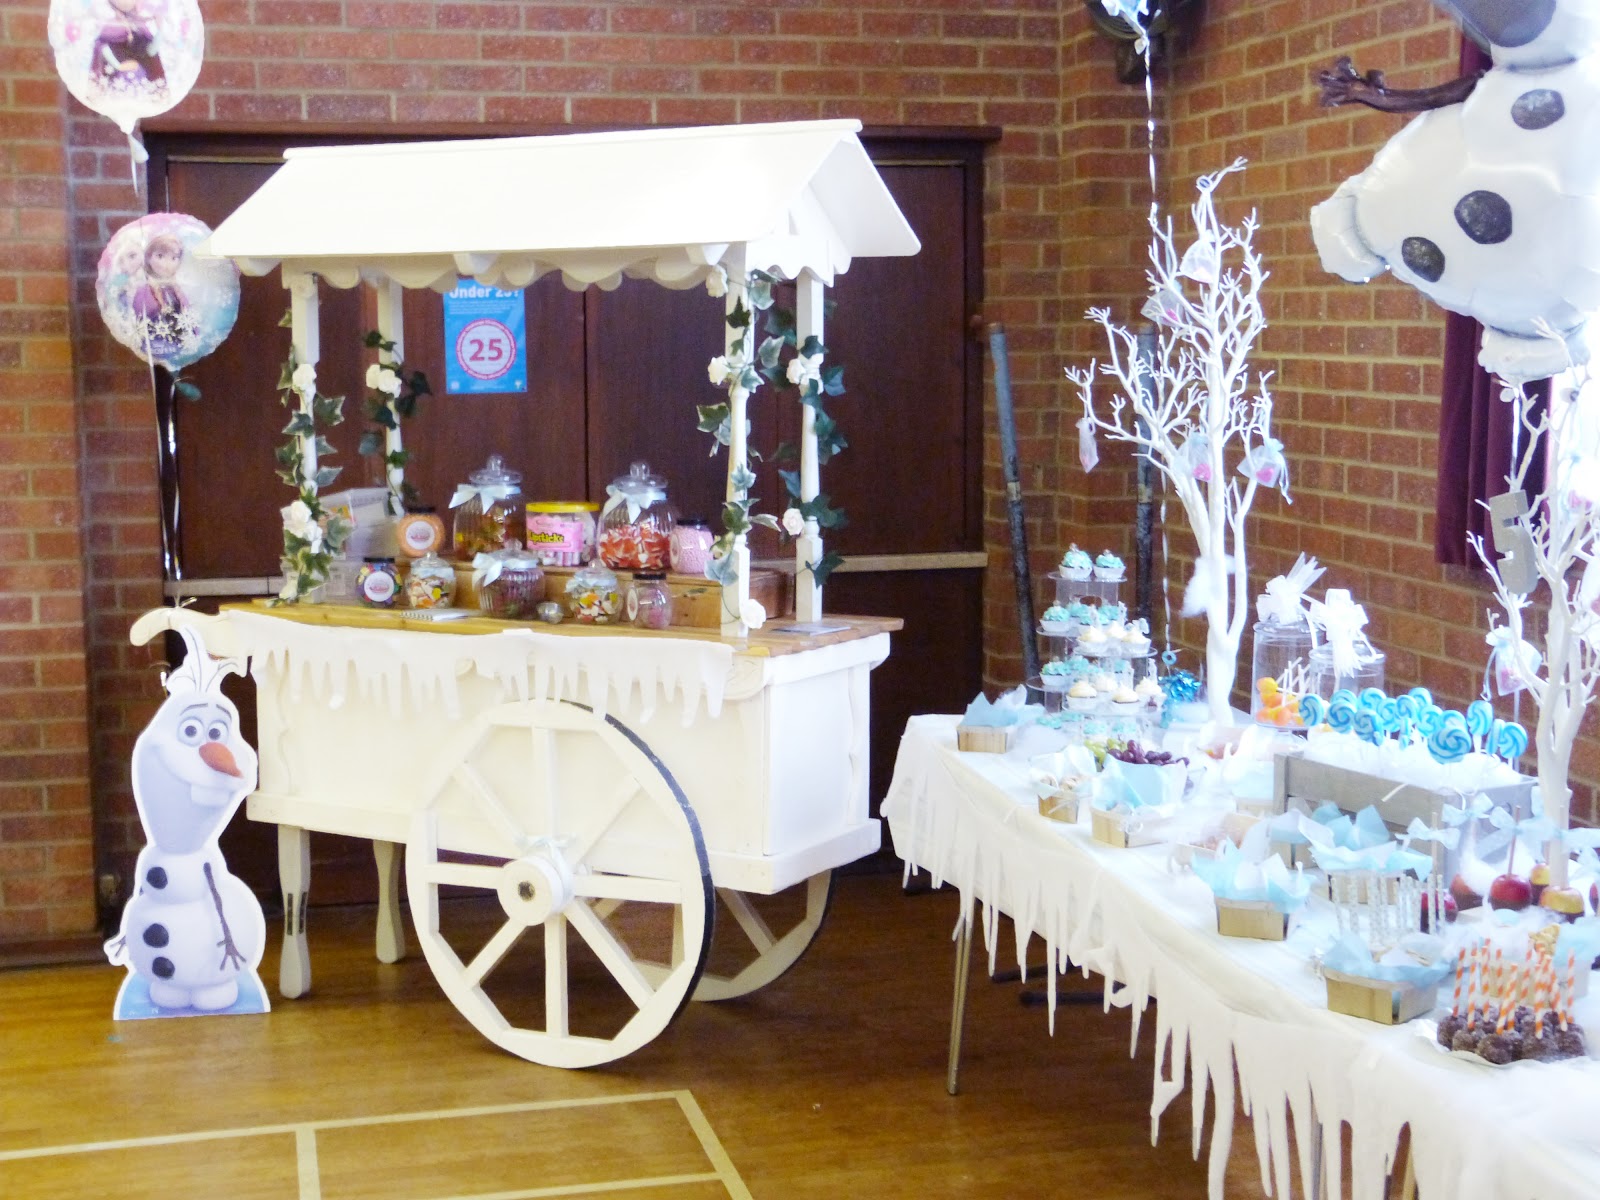 OUR FROZEN INSPIRED PARTY – PART ONE [DECORATING]